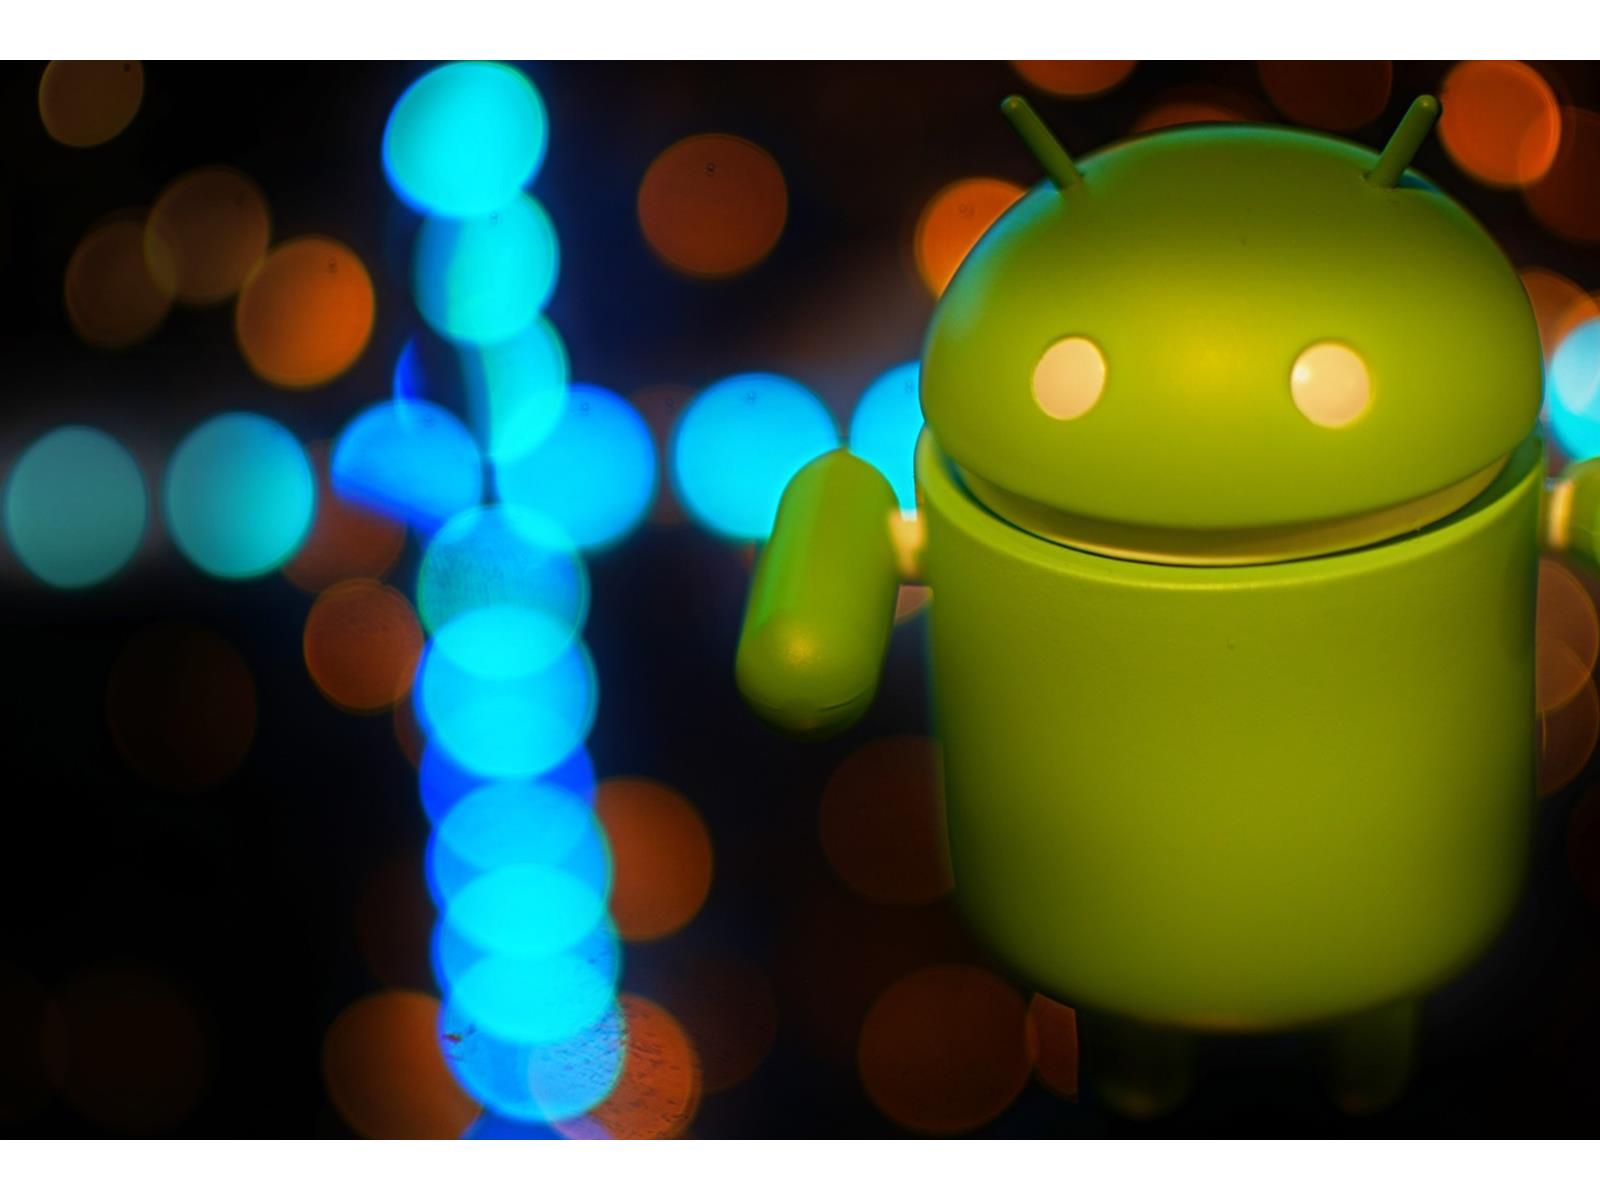 Thousands of Android APKs use compression trick to thwart analysis